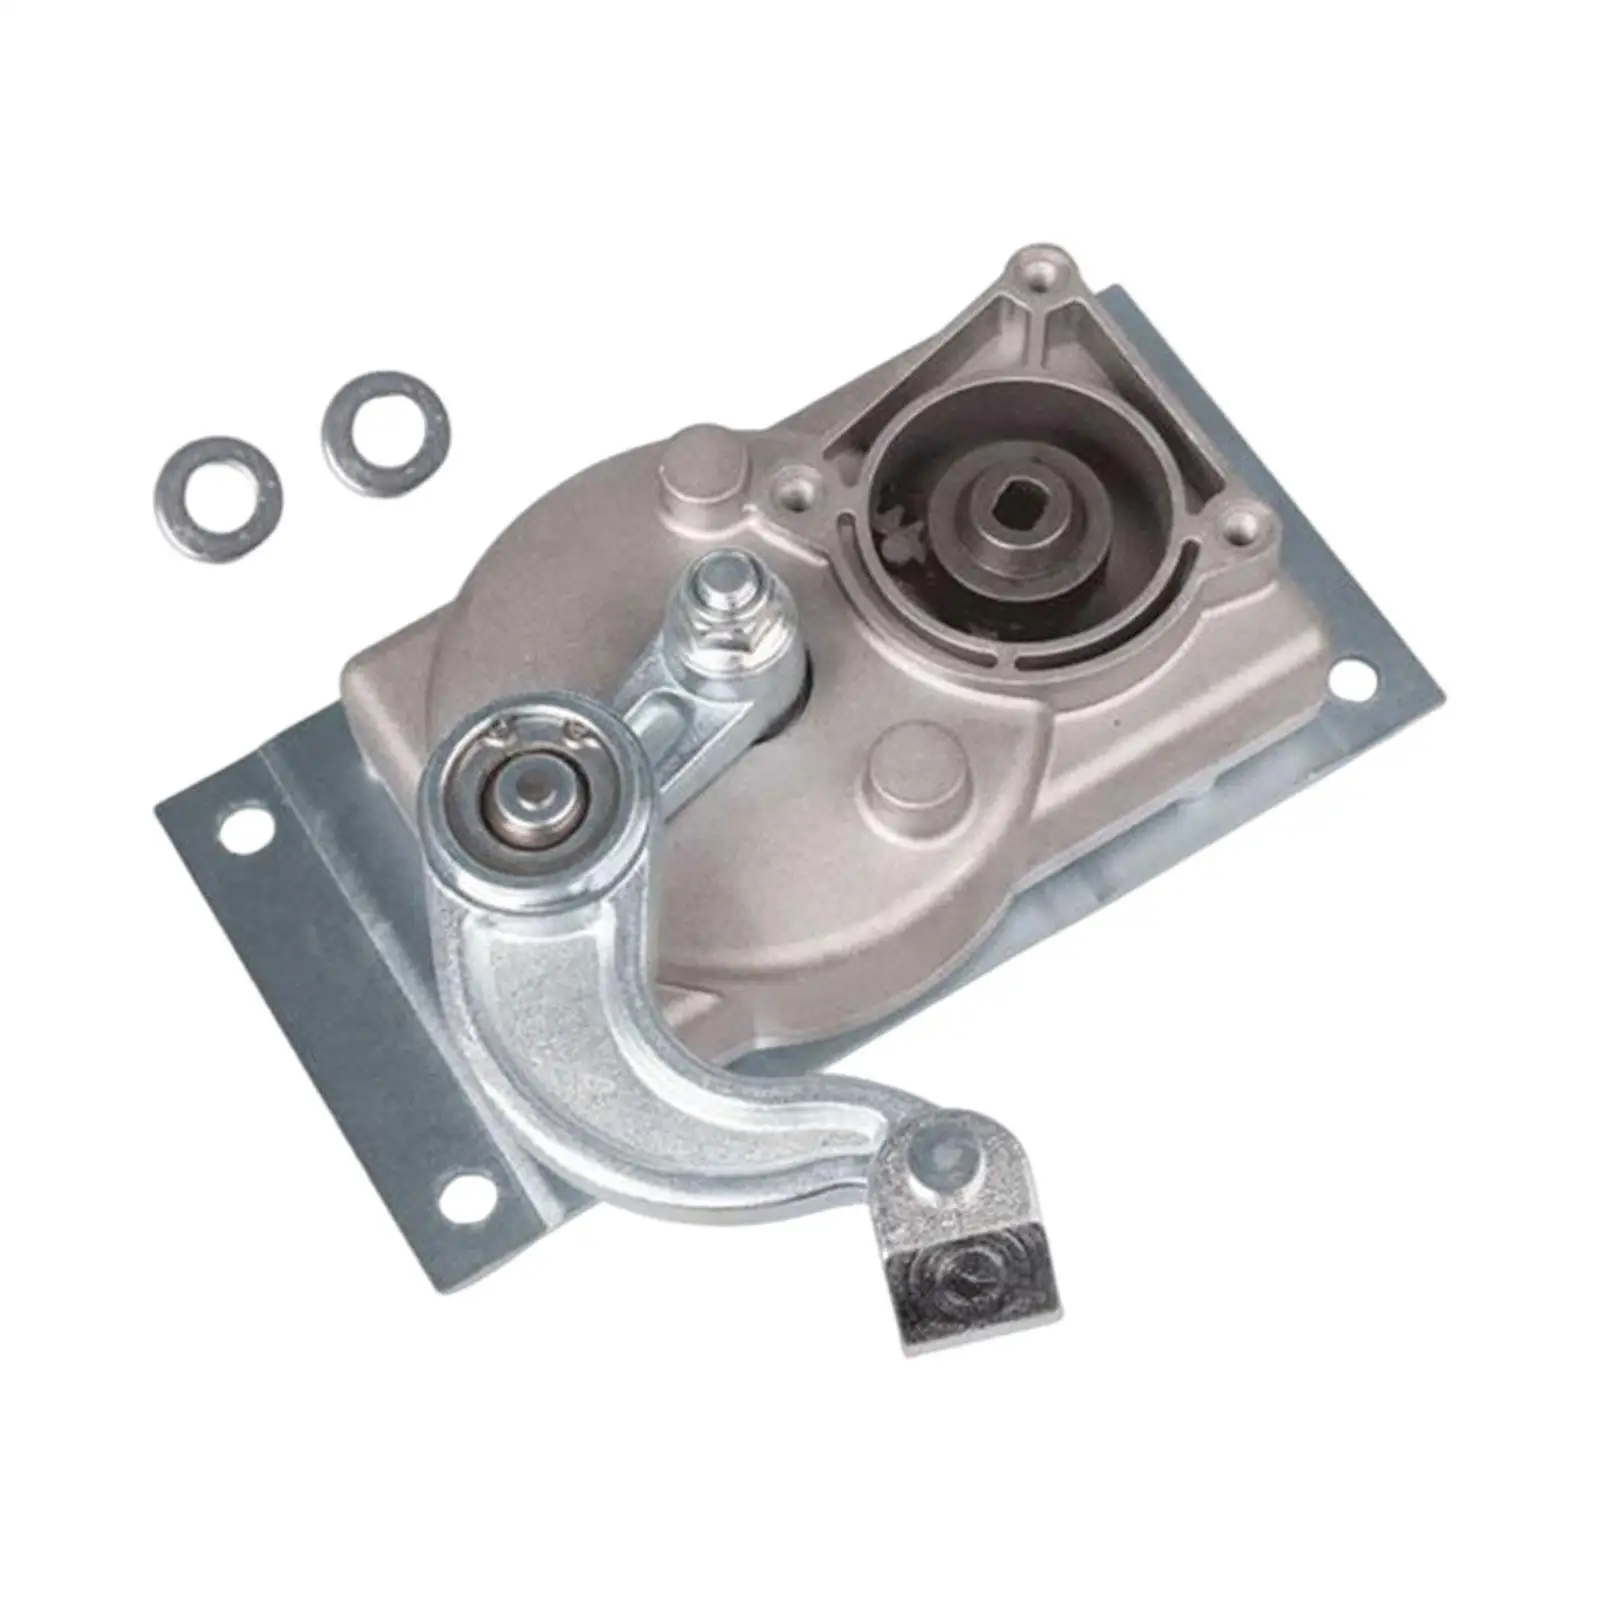 Motor Gear Box Linkage Easy Installation Gear Box Curved Linkage with A for Step Series 676061 379147 Motor 22 23 28A